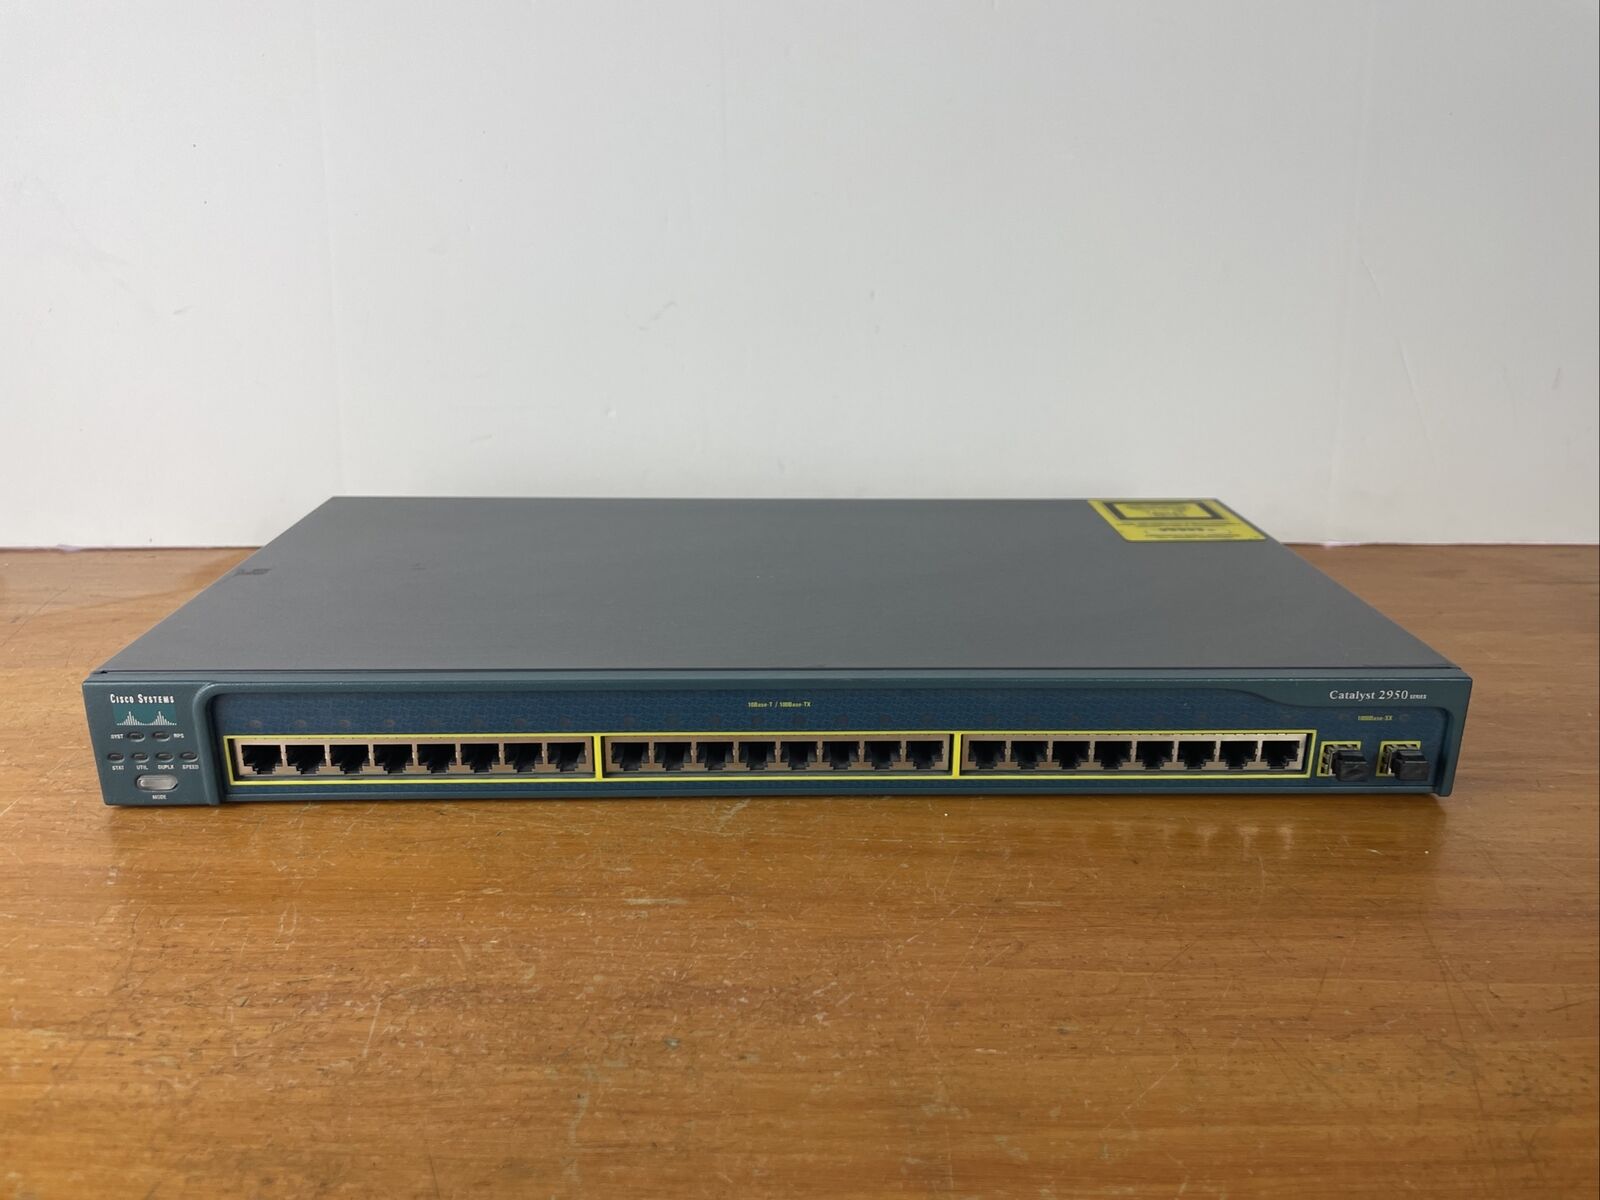 Lot of 8 Cisco Catalyst WS-C2950SX-24 24-Port 10/100 Managed Ethernet Switches